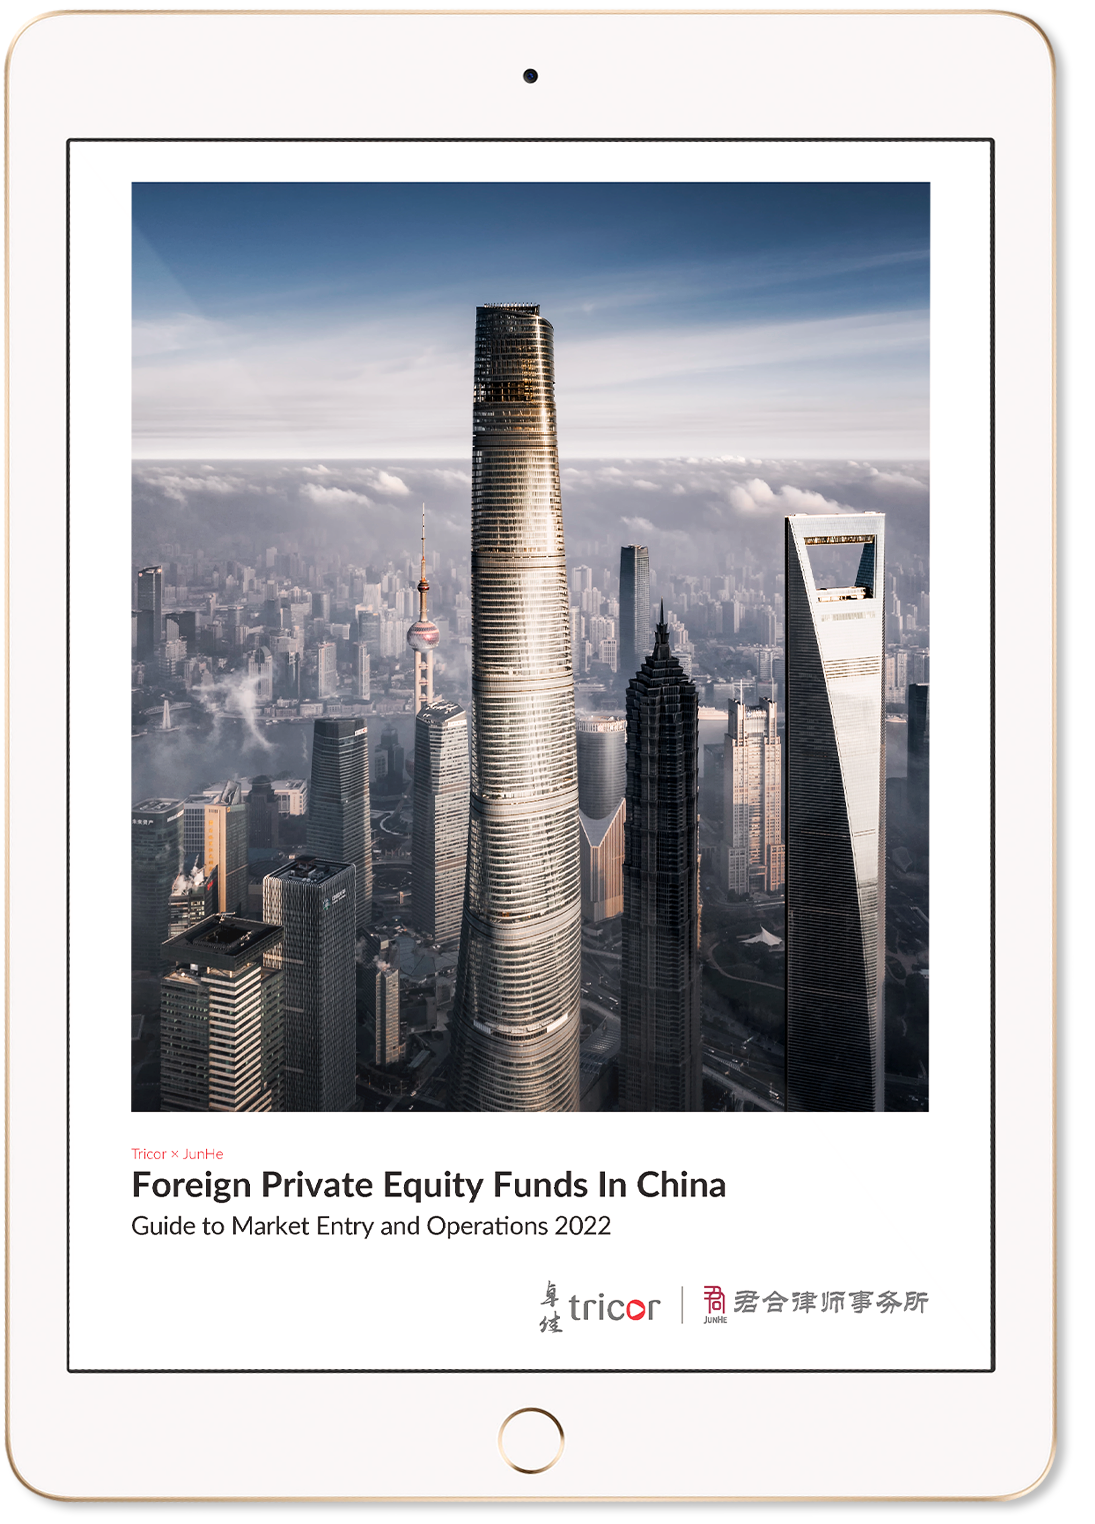 Foreign Private Equity Funds in China - Guide to Market Entry and Operations 2022